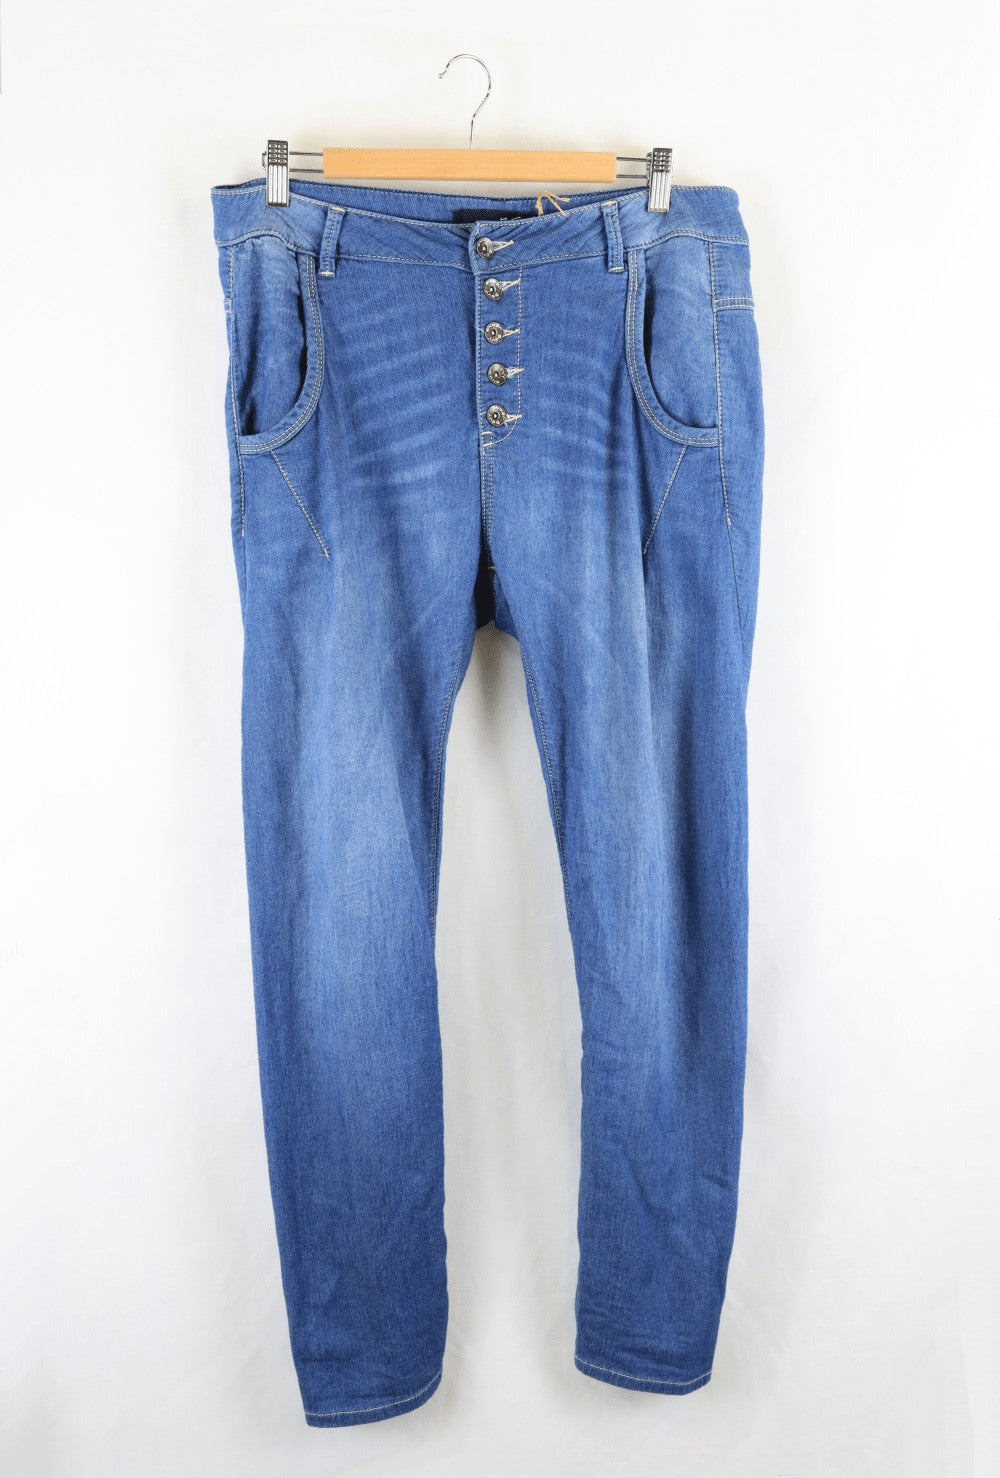 Bevy Blue Jeans 12